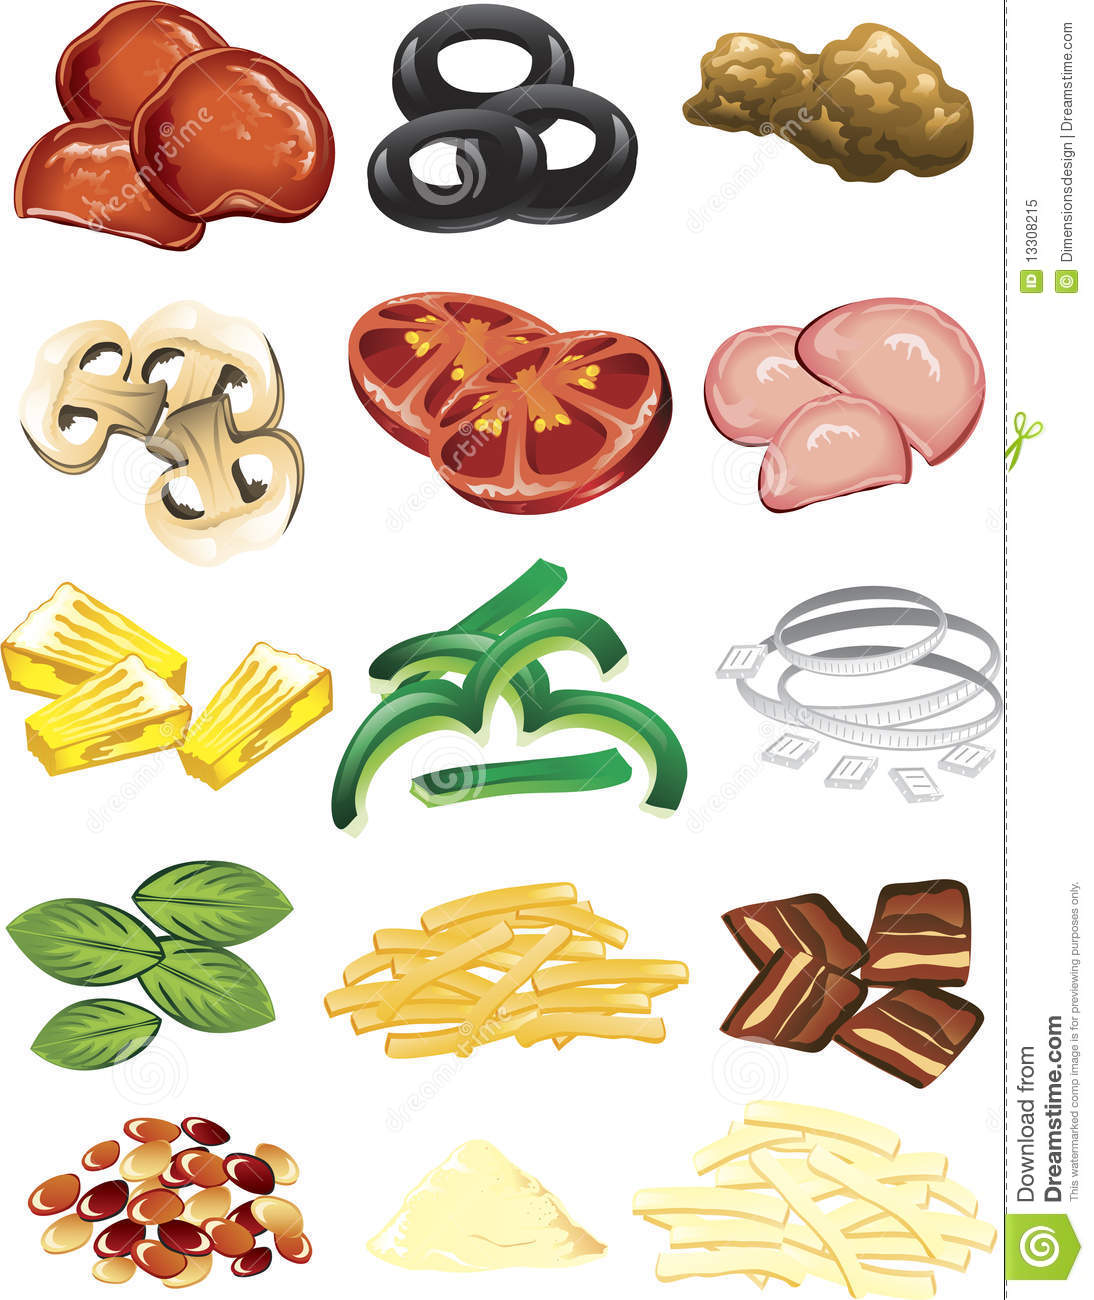 Pizza Toppings Royalty Free Stock Photo   Image  13308215